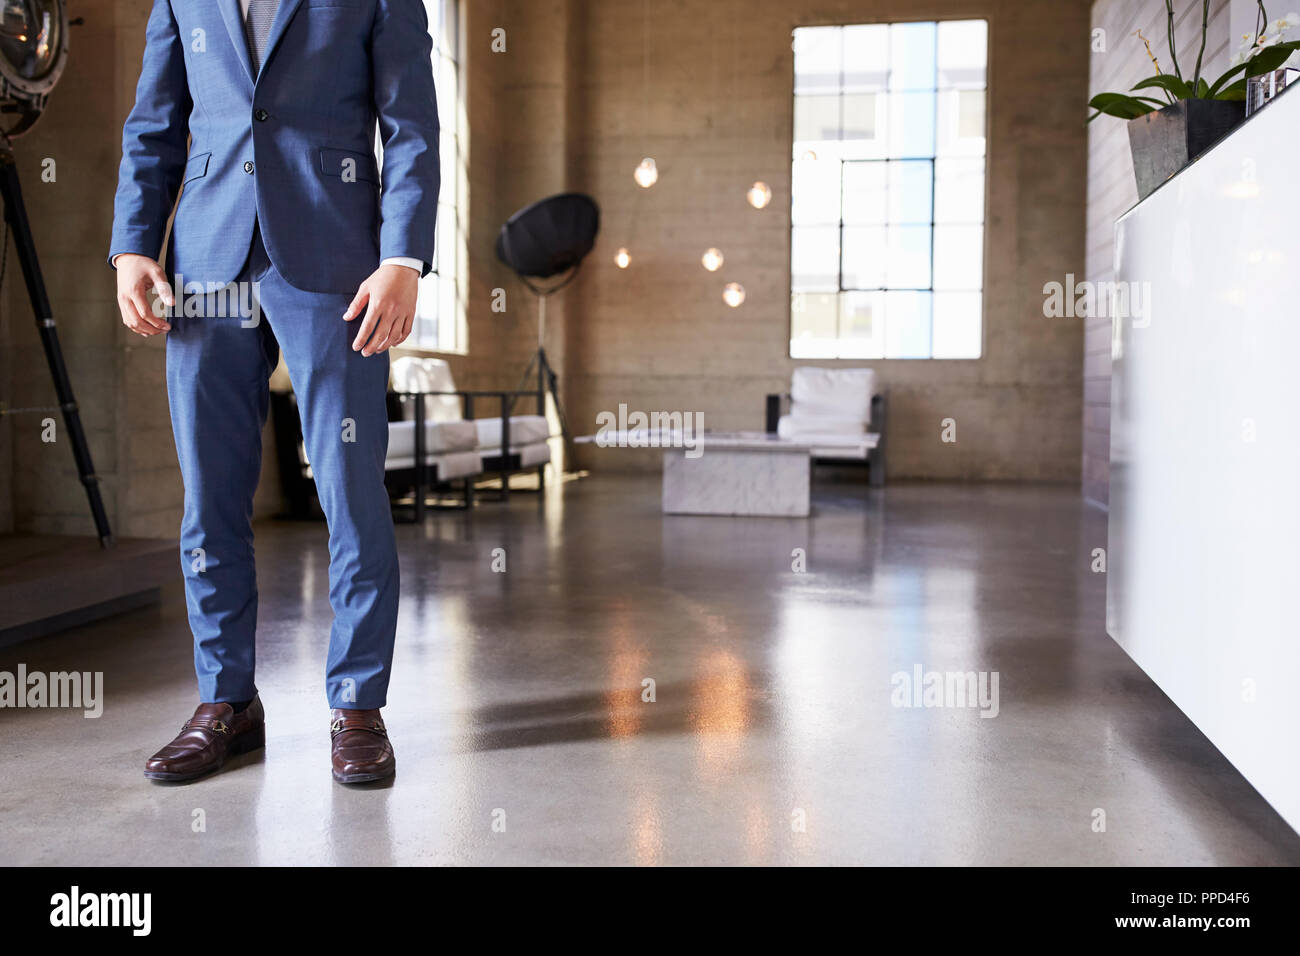 Low section of man in suit standing in modern furnished room Stock Photo